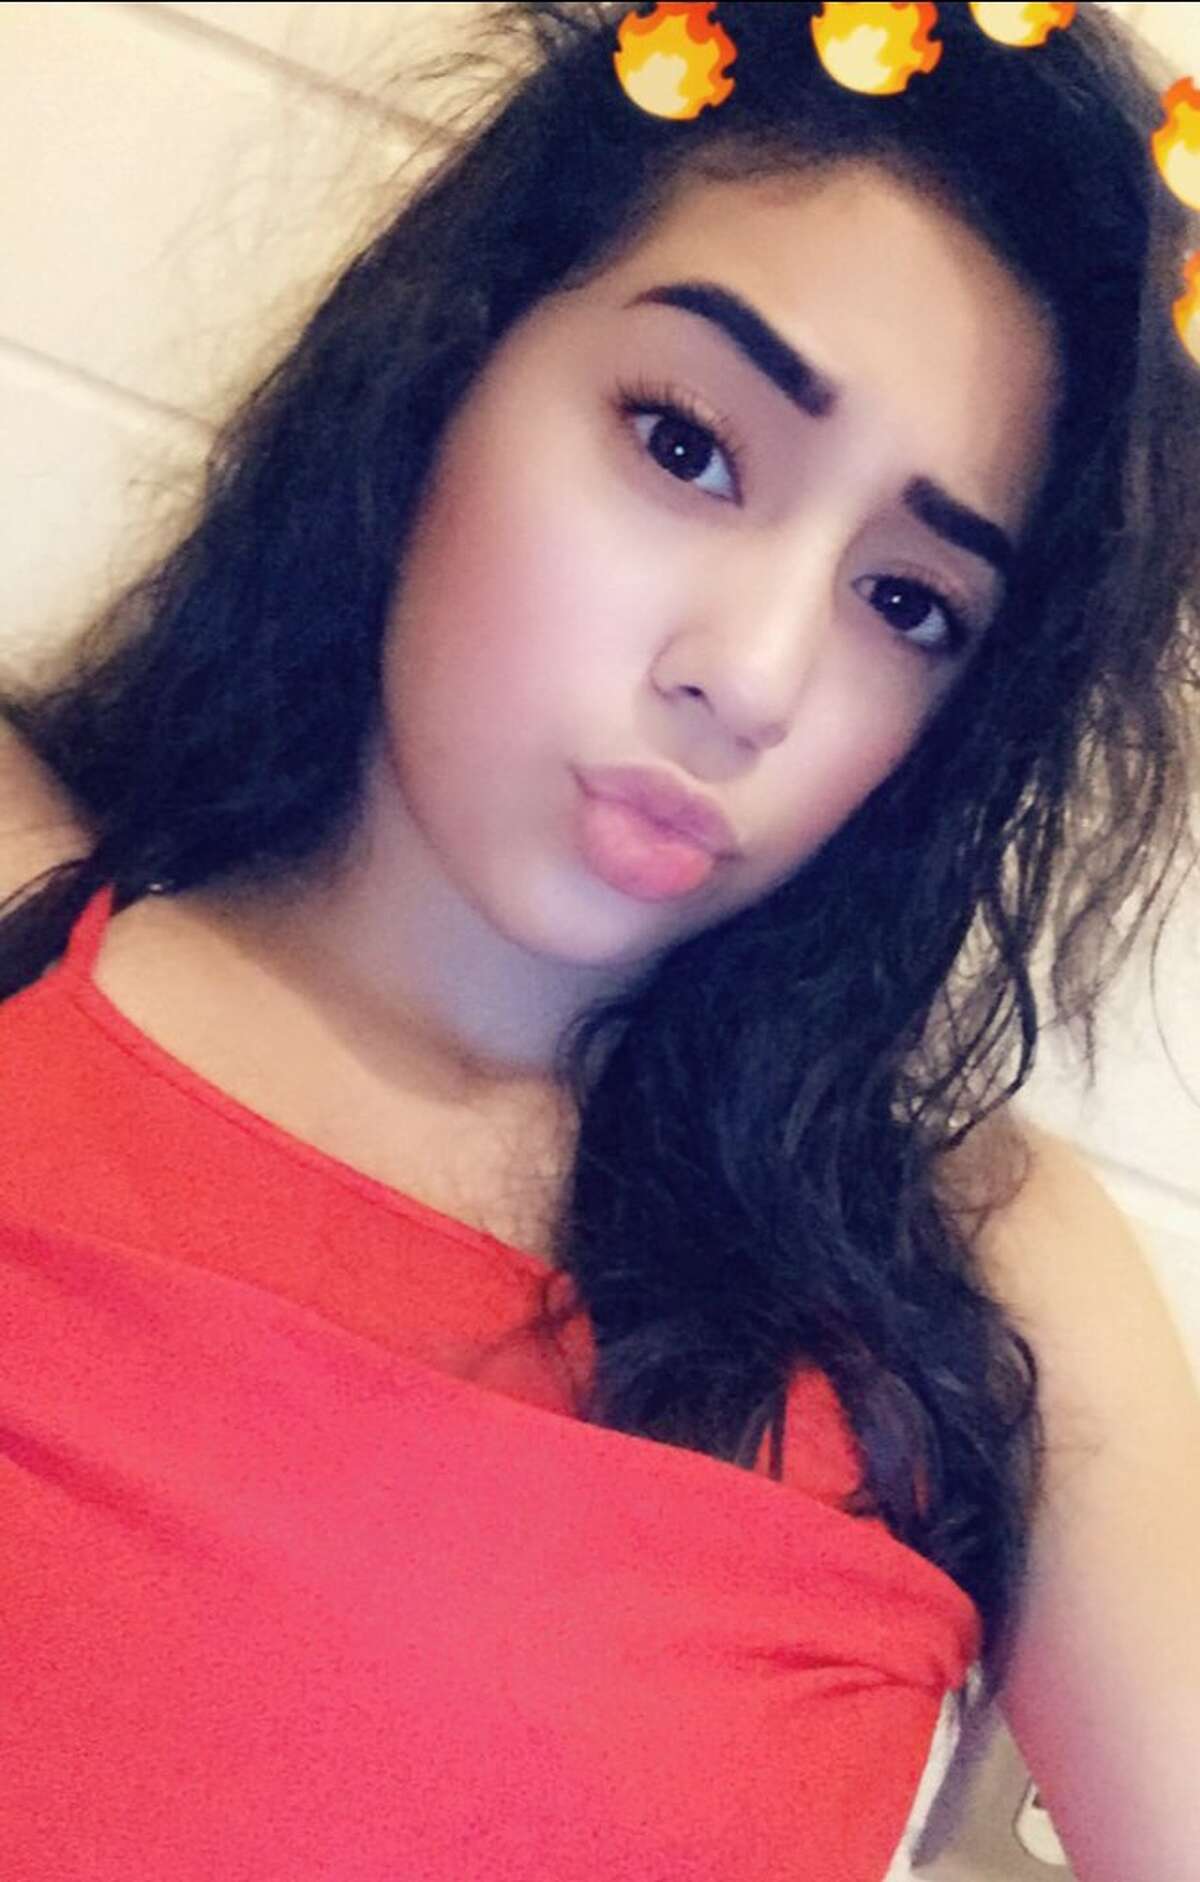 Police said Ashley Fernandez, 16, was kidnapped by her boyfriend on Friday, May 11, 2018.